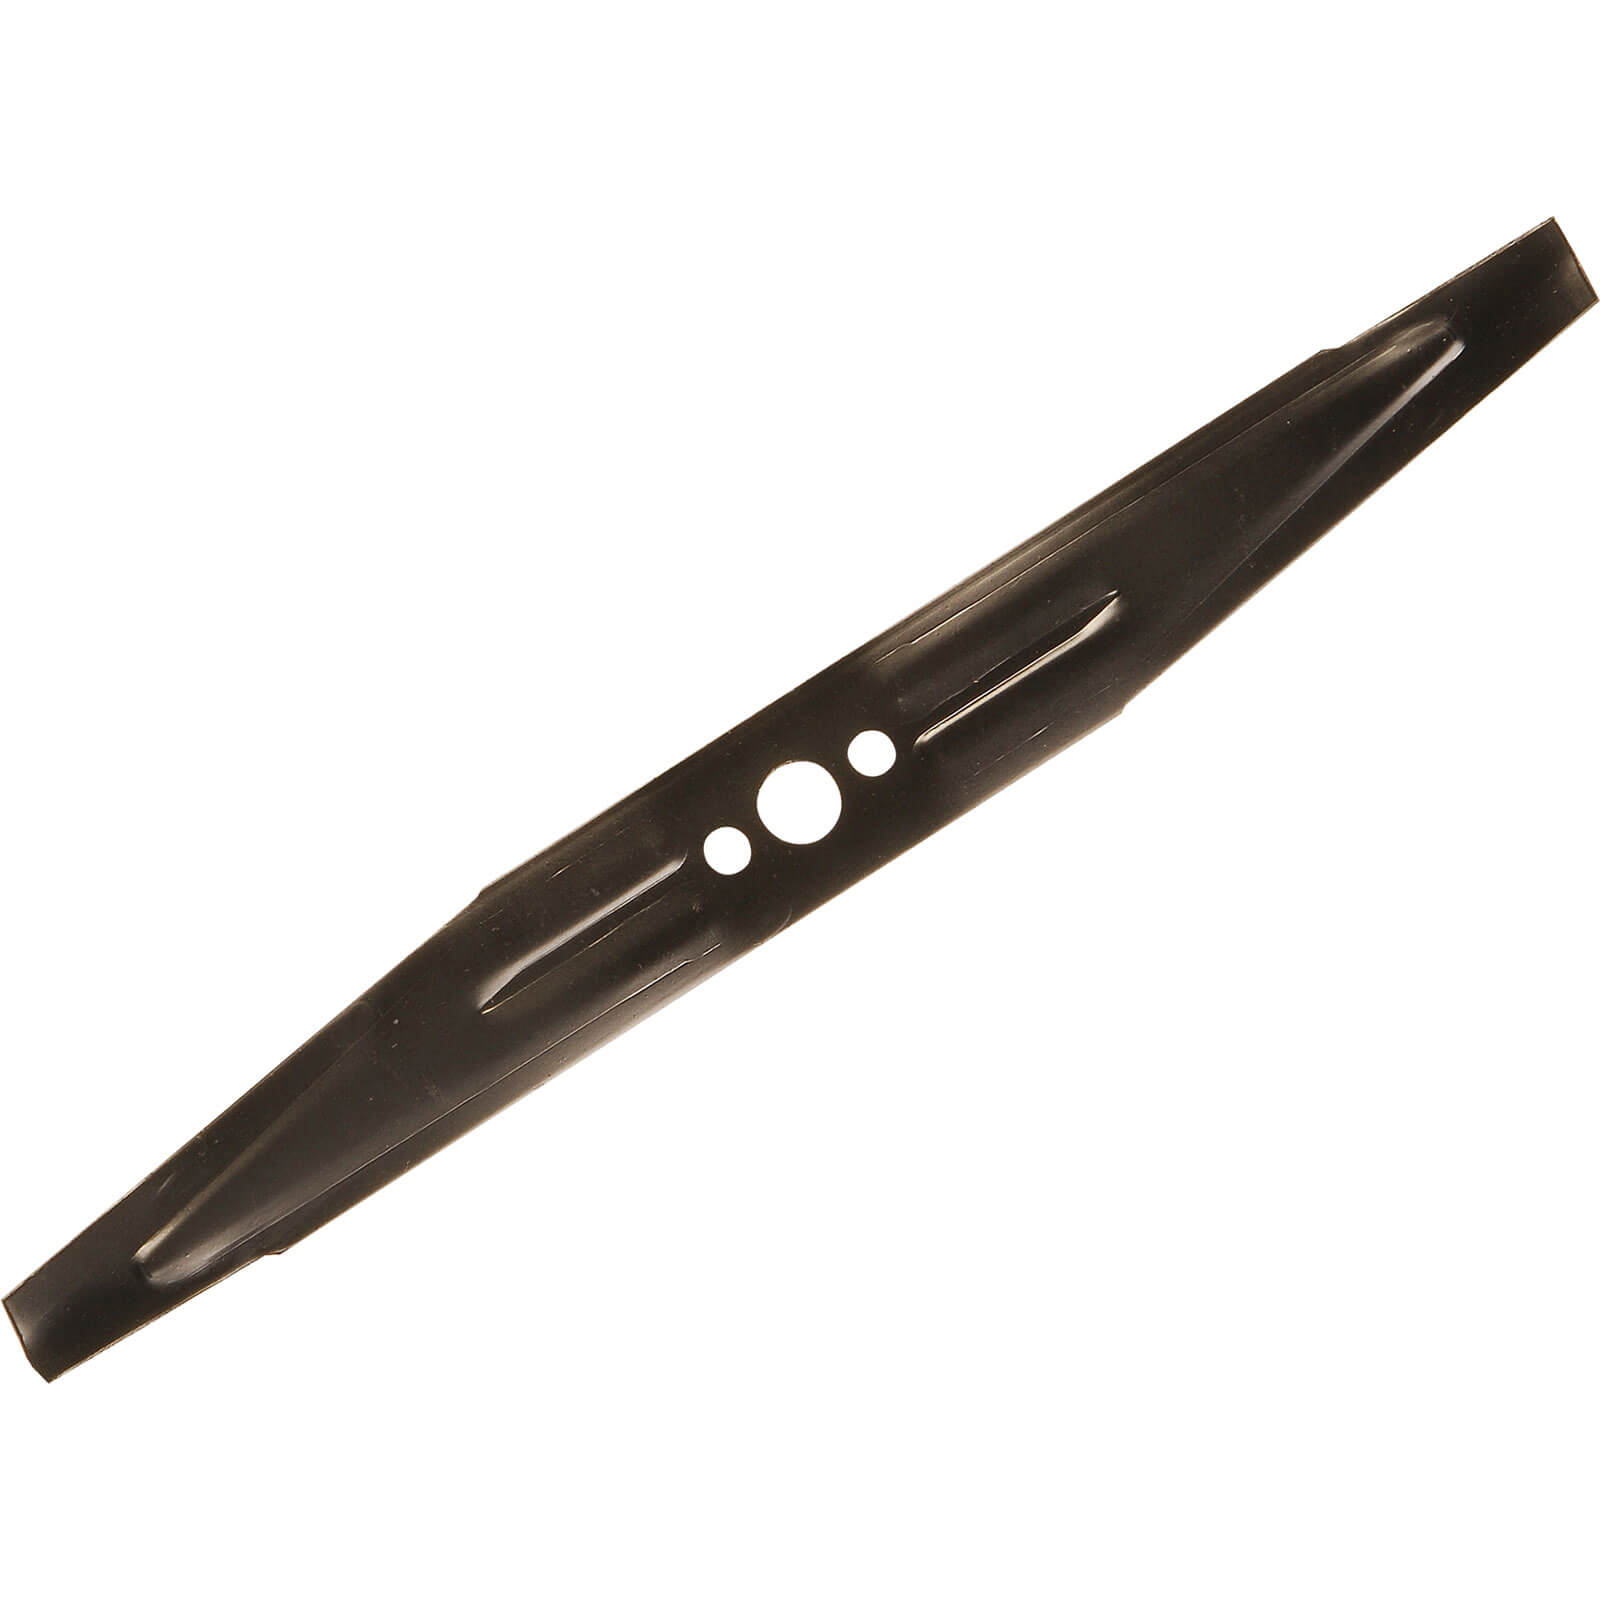 ALM Replacement Metal Lawnmower Blade for Flymo Turbo Compact 380 & Vision Compact 380 Models